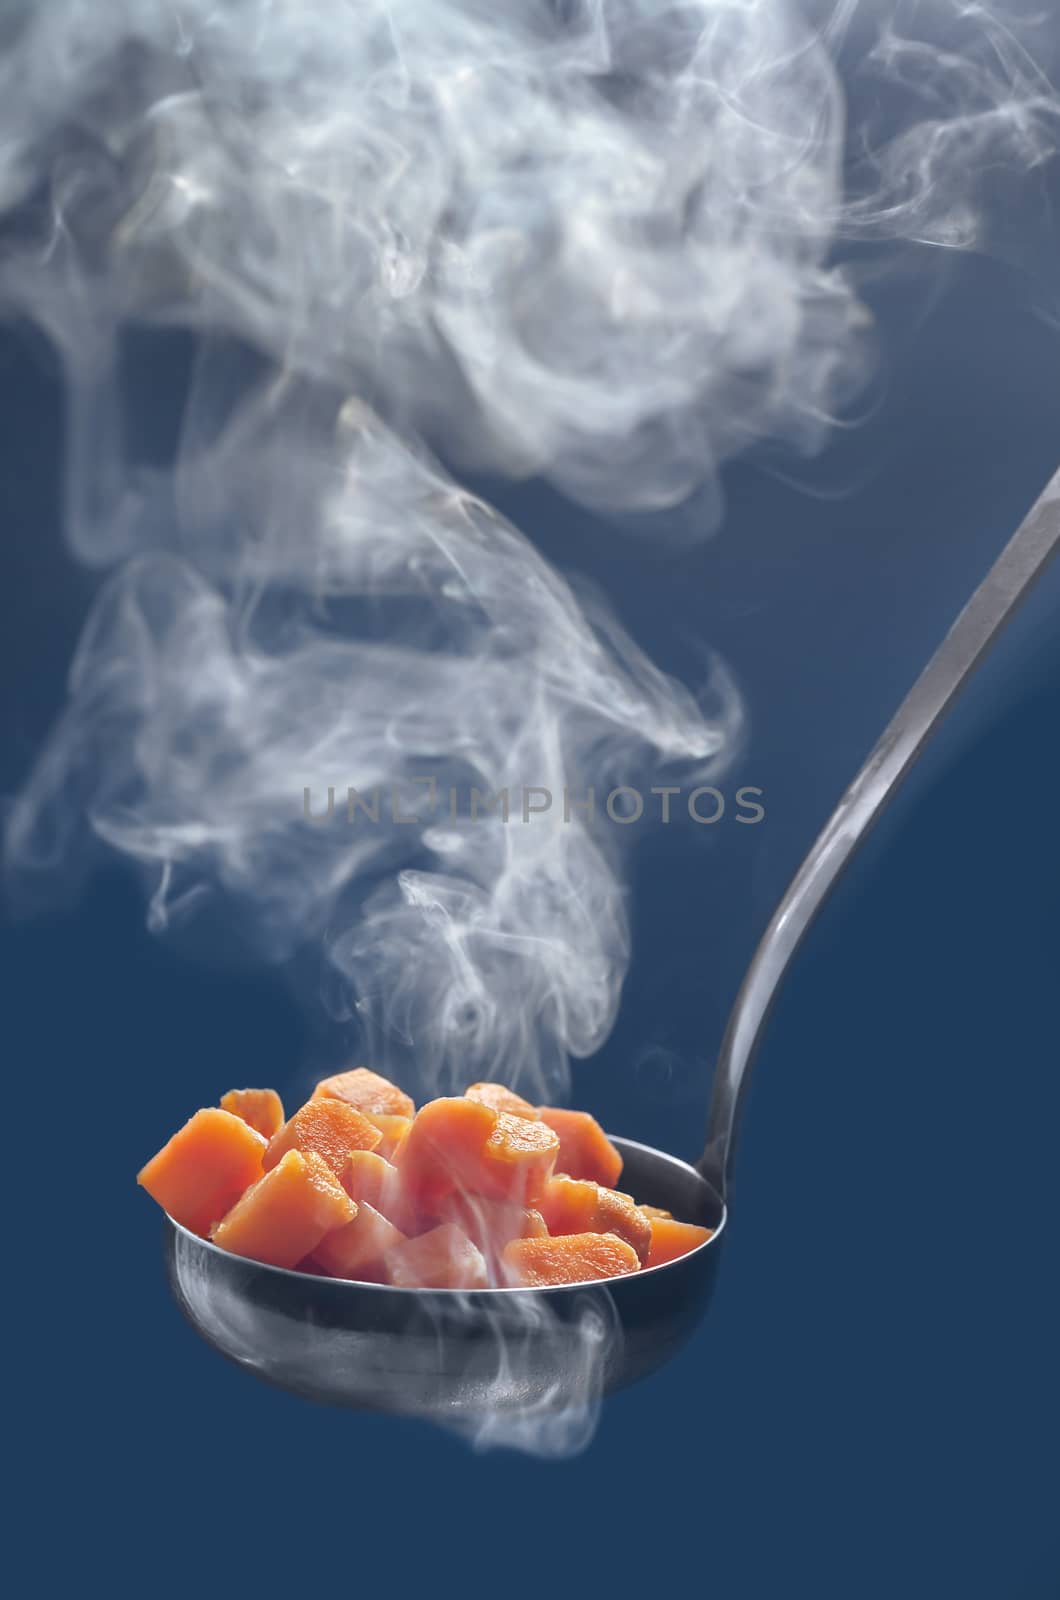 Hot boiled carrots in a bucket, diced. Blue background, from hot vegetables, steam rises.